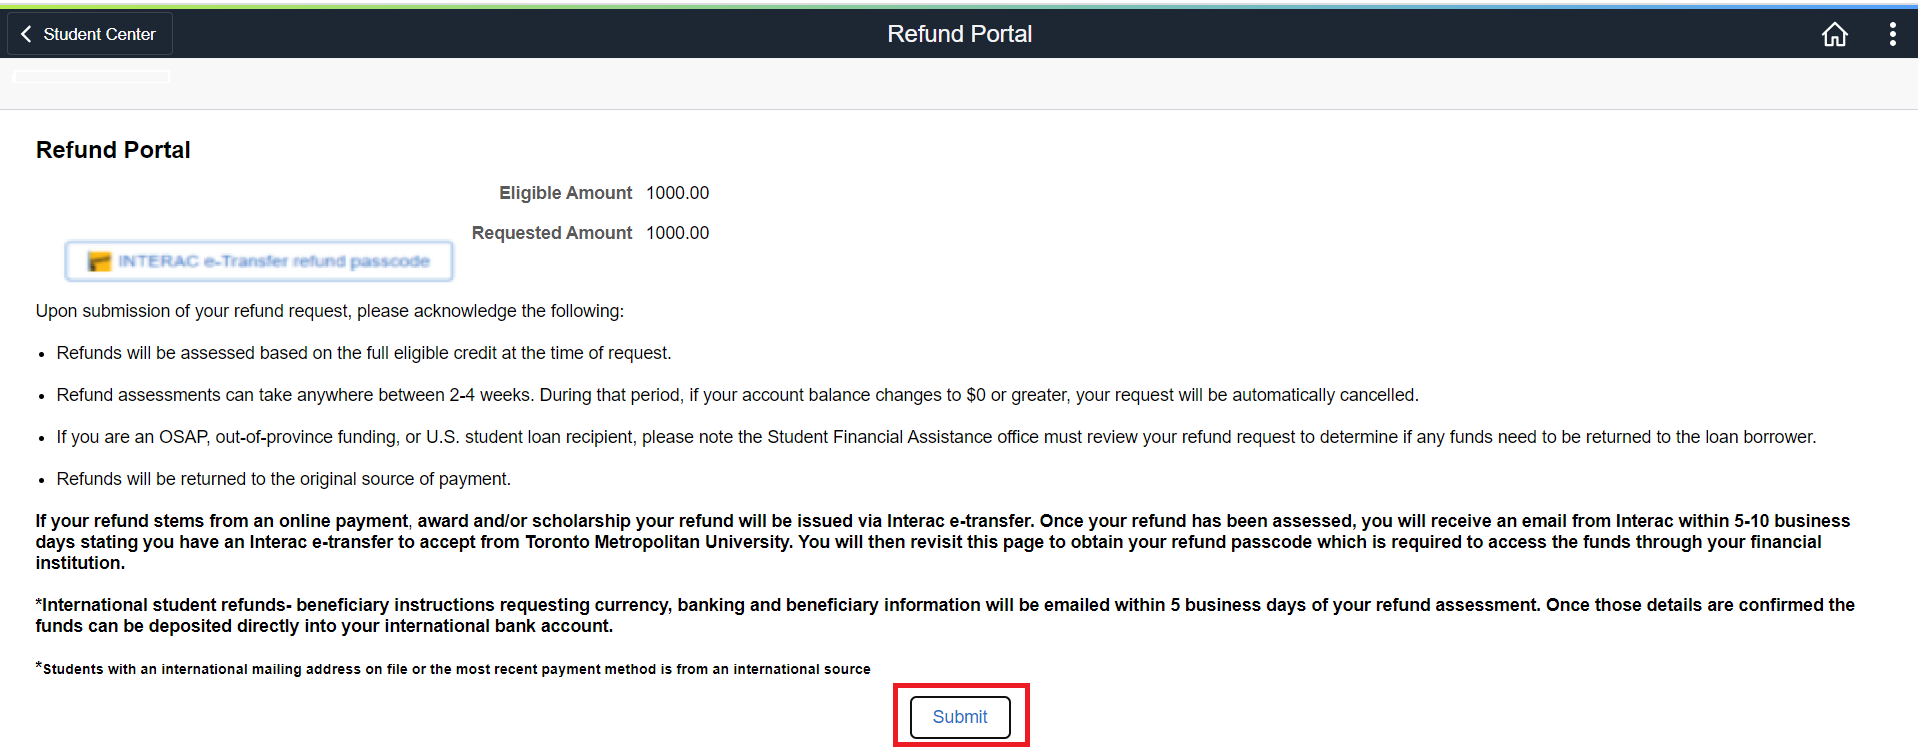 Refund Portal page includes eligible amount, requested amount, a link to your Interac e-Transfer refund passcode and a Submit button at the bottom of the screen.